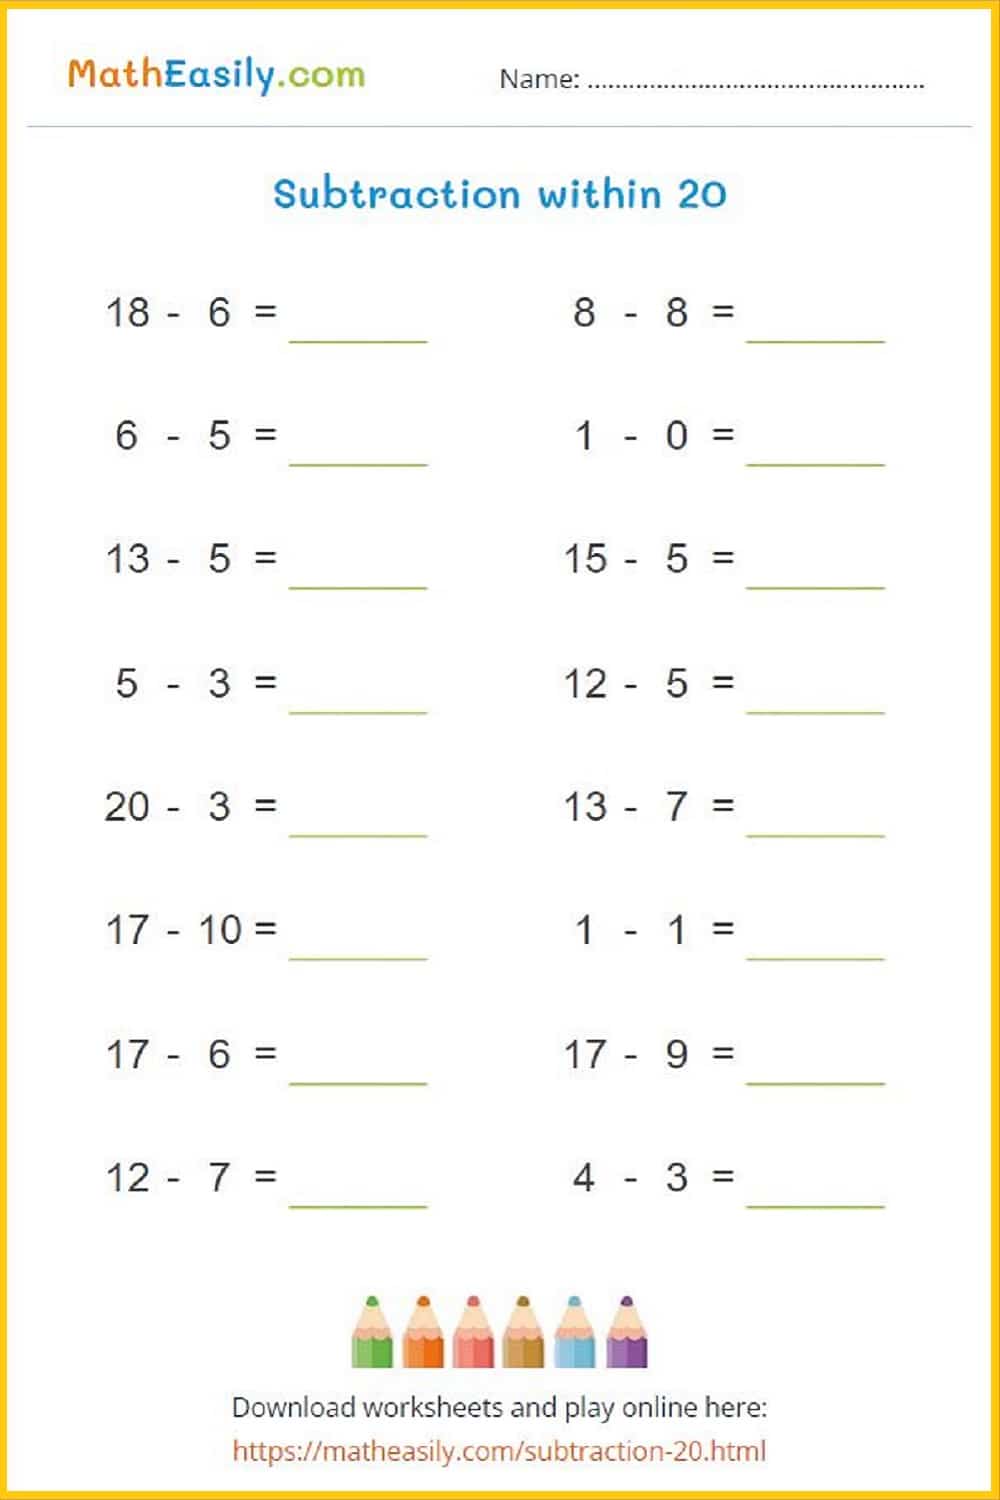 Download free subtraction to 20 worksheets in PDF. Download printable subtraction within 20 worksheets free